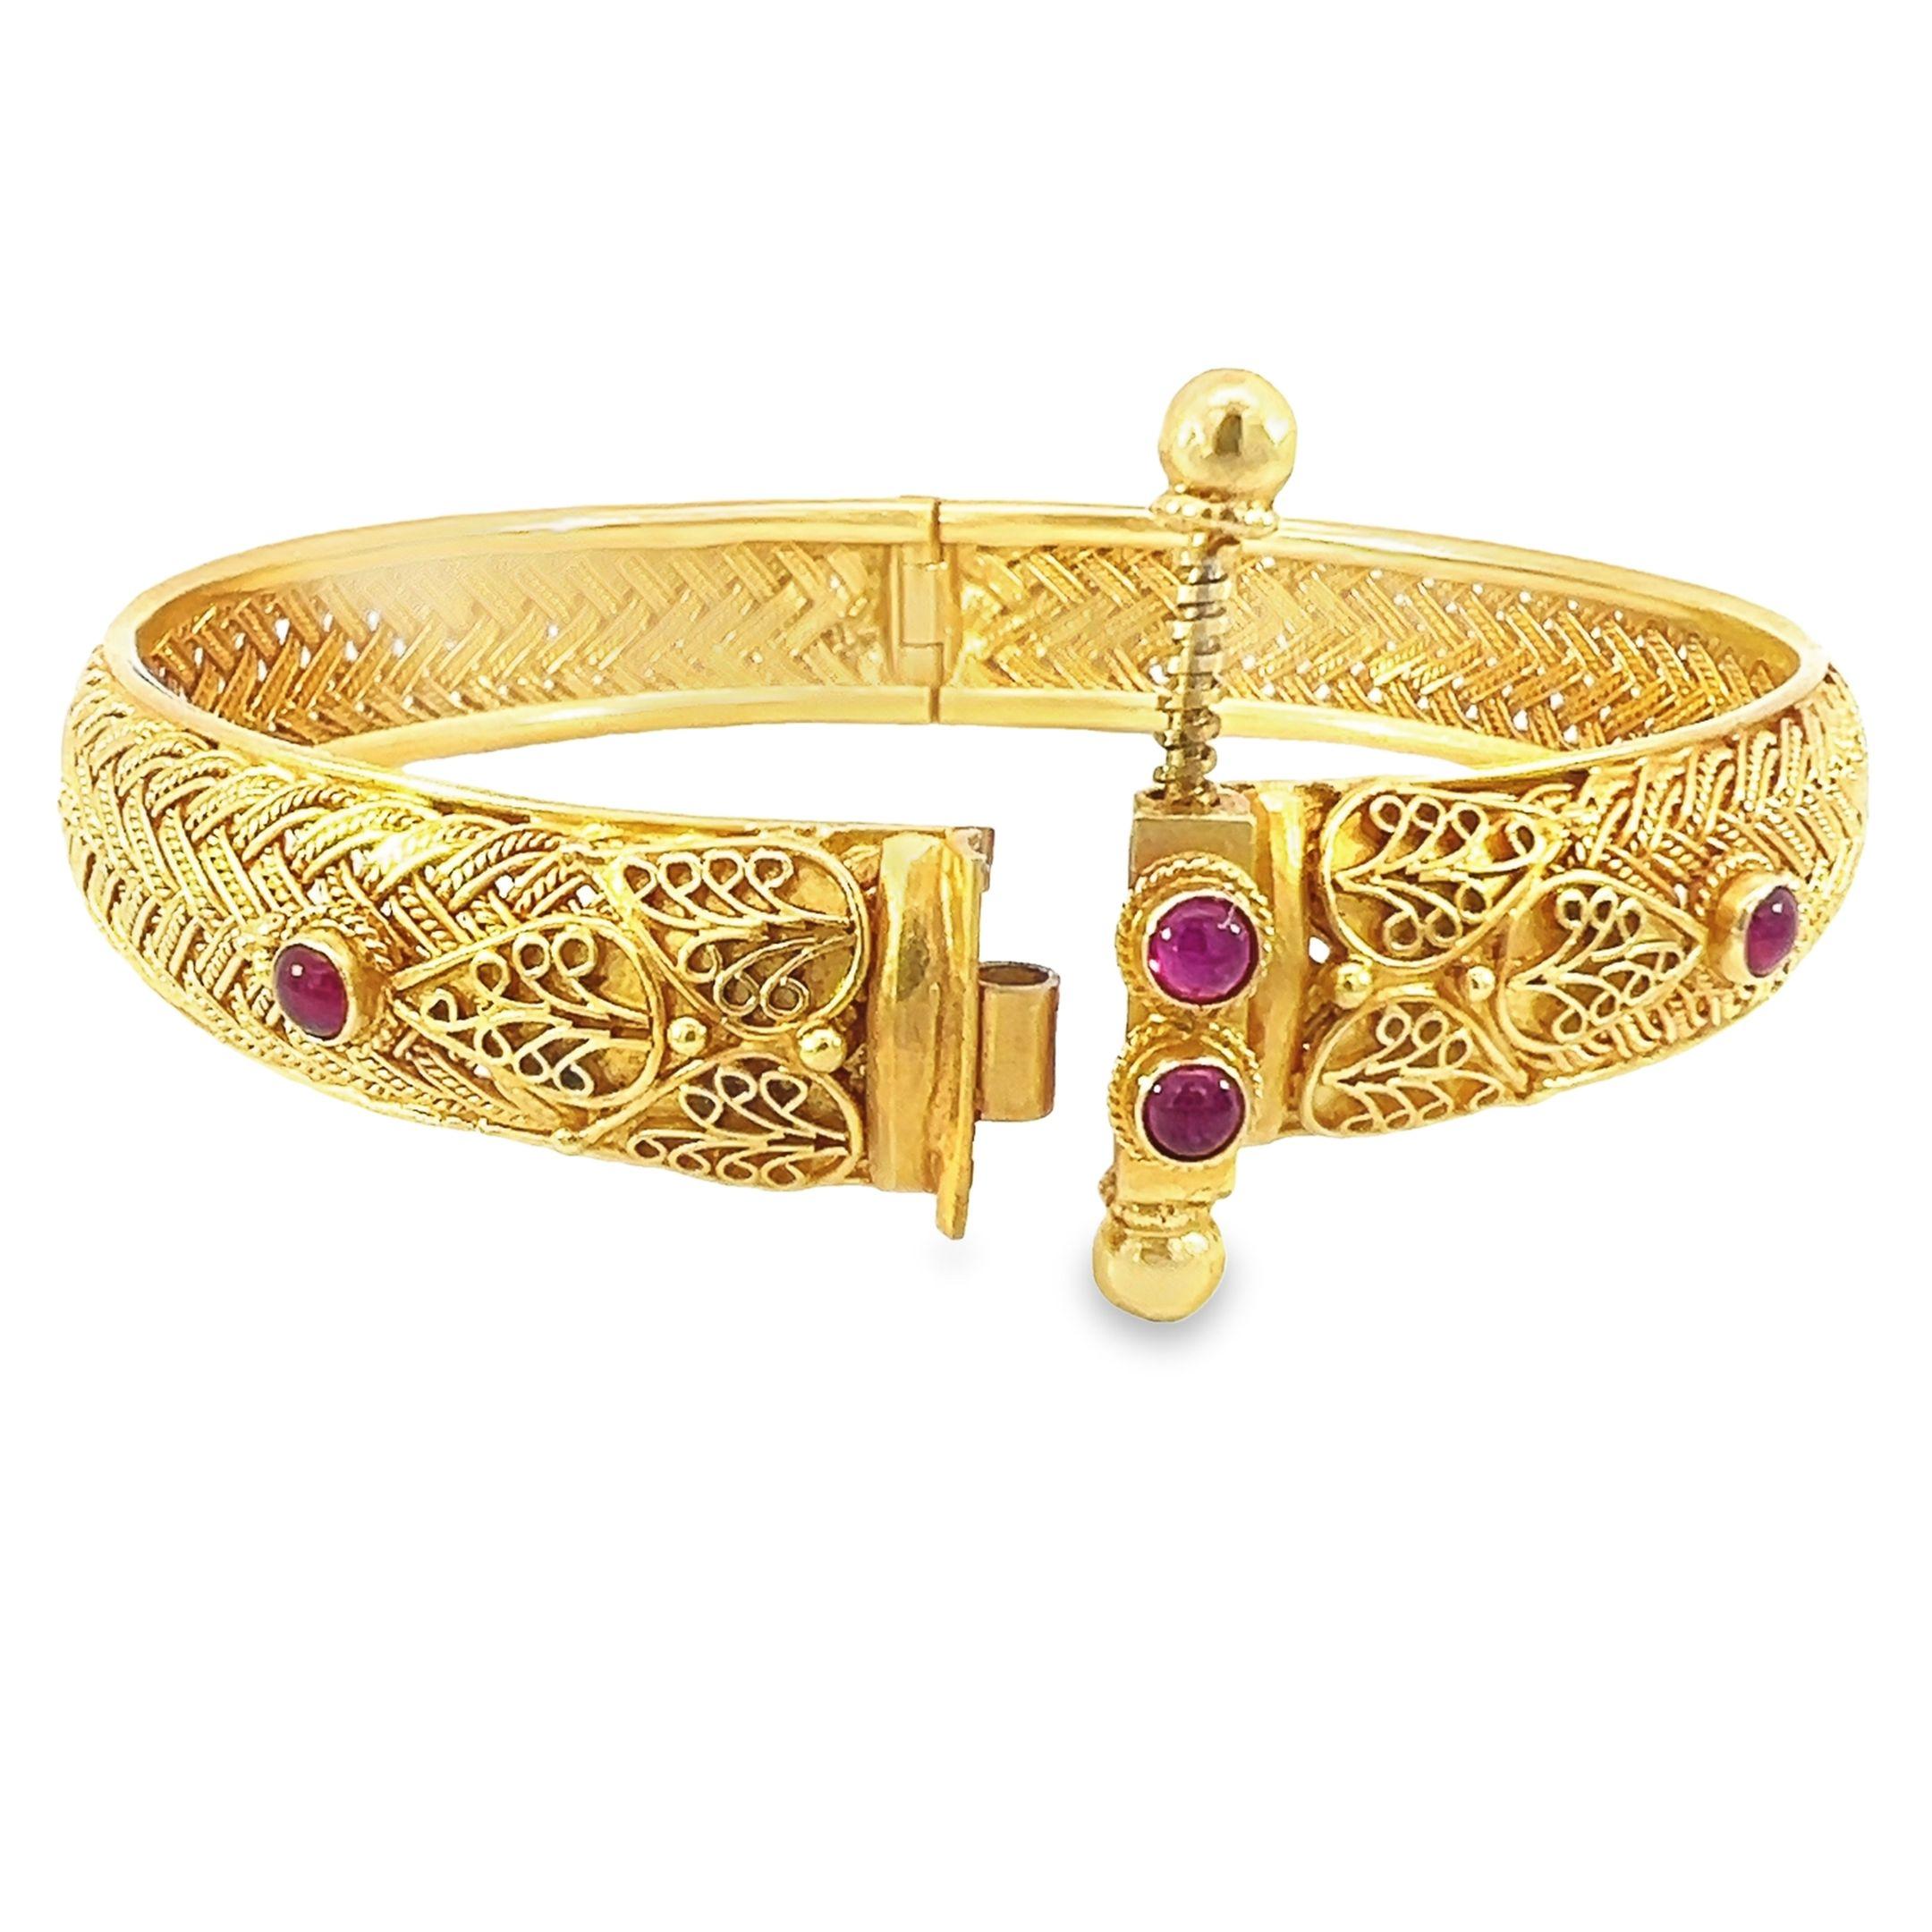 A beautiful solid bangle made with 18-karat yellow gold and feature with 0.95-carat Ruby. 
A stunning timeless piece that exudes. This bangle features a screw lock for further security and a unique, stunning appearance. Bangle has an amazing design